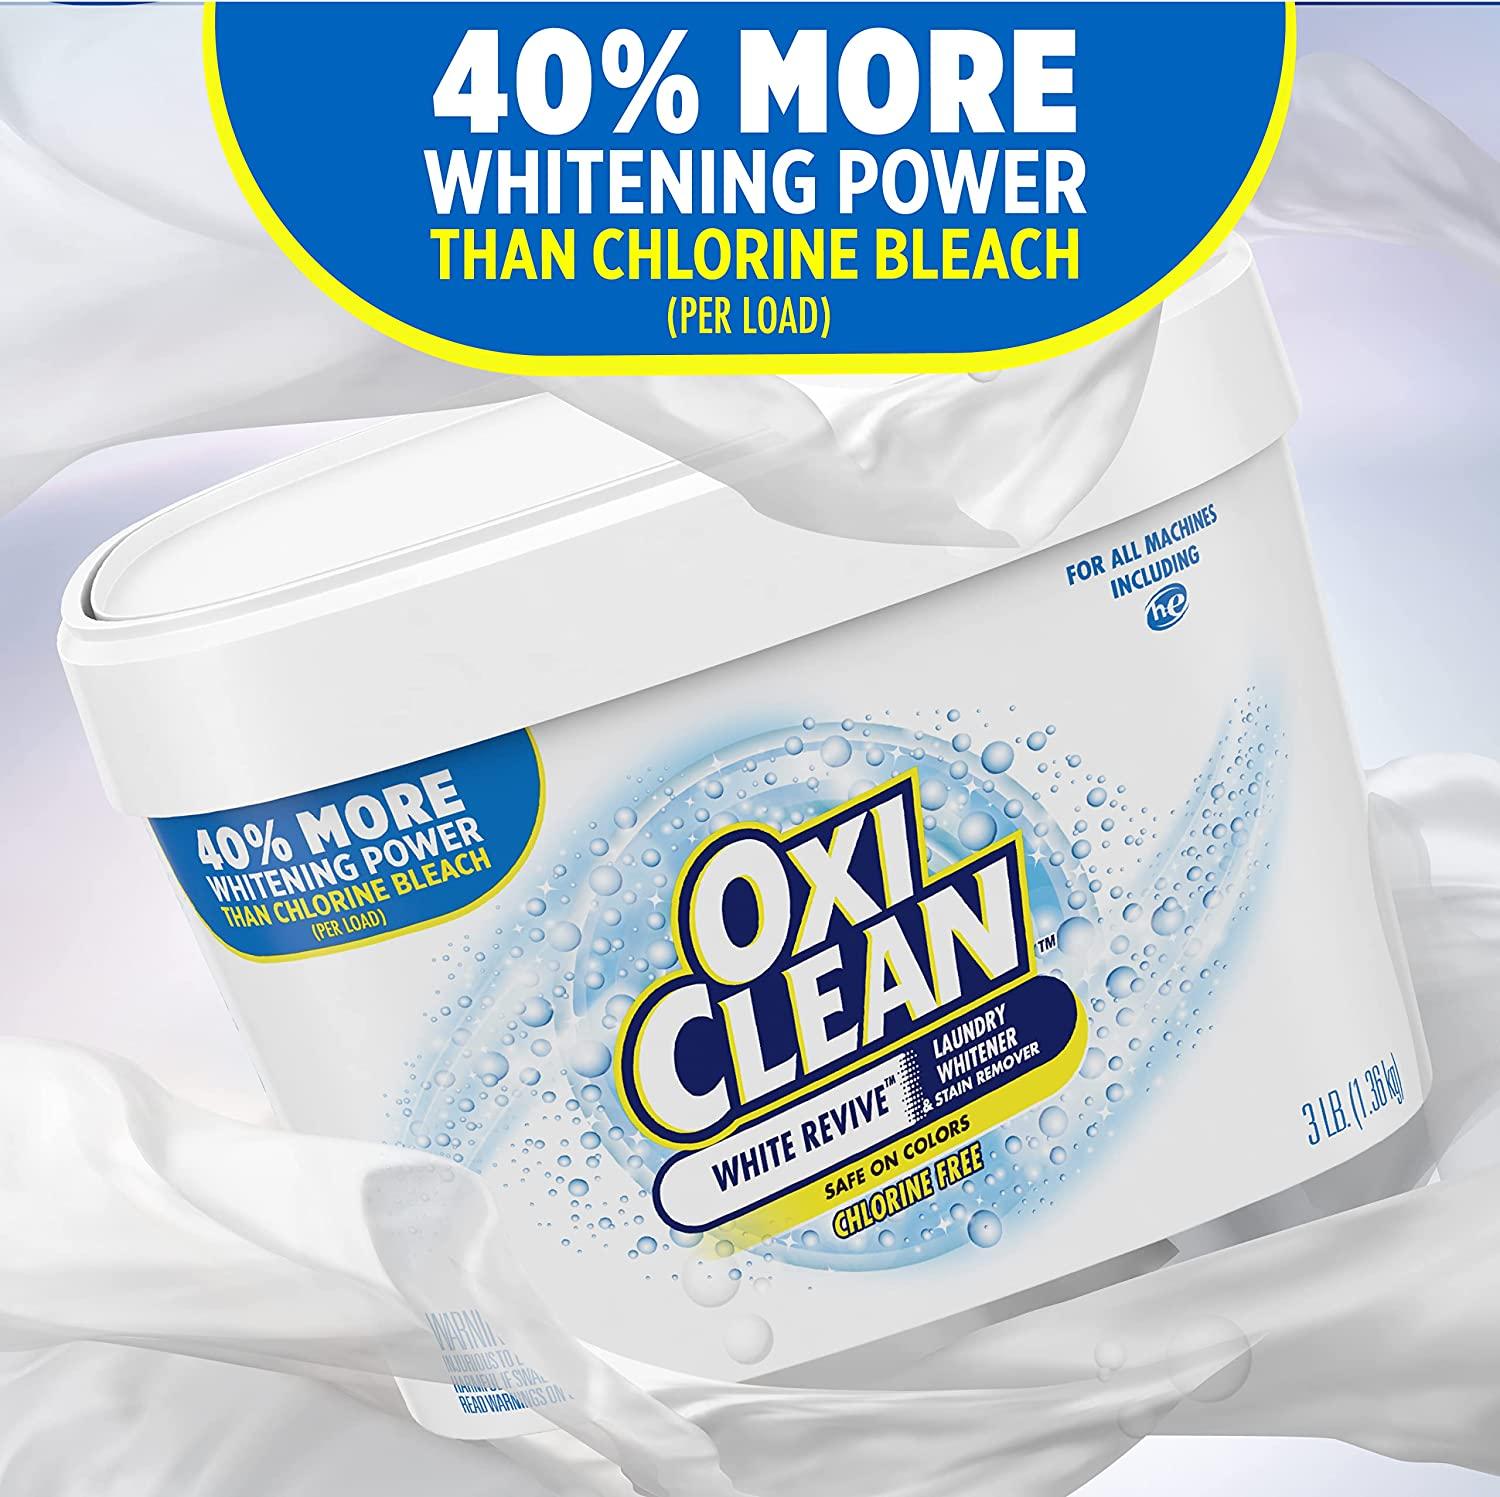 OxiClean White Revive Laundry Whitener Stain Remover - 5 Lbs